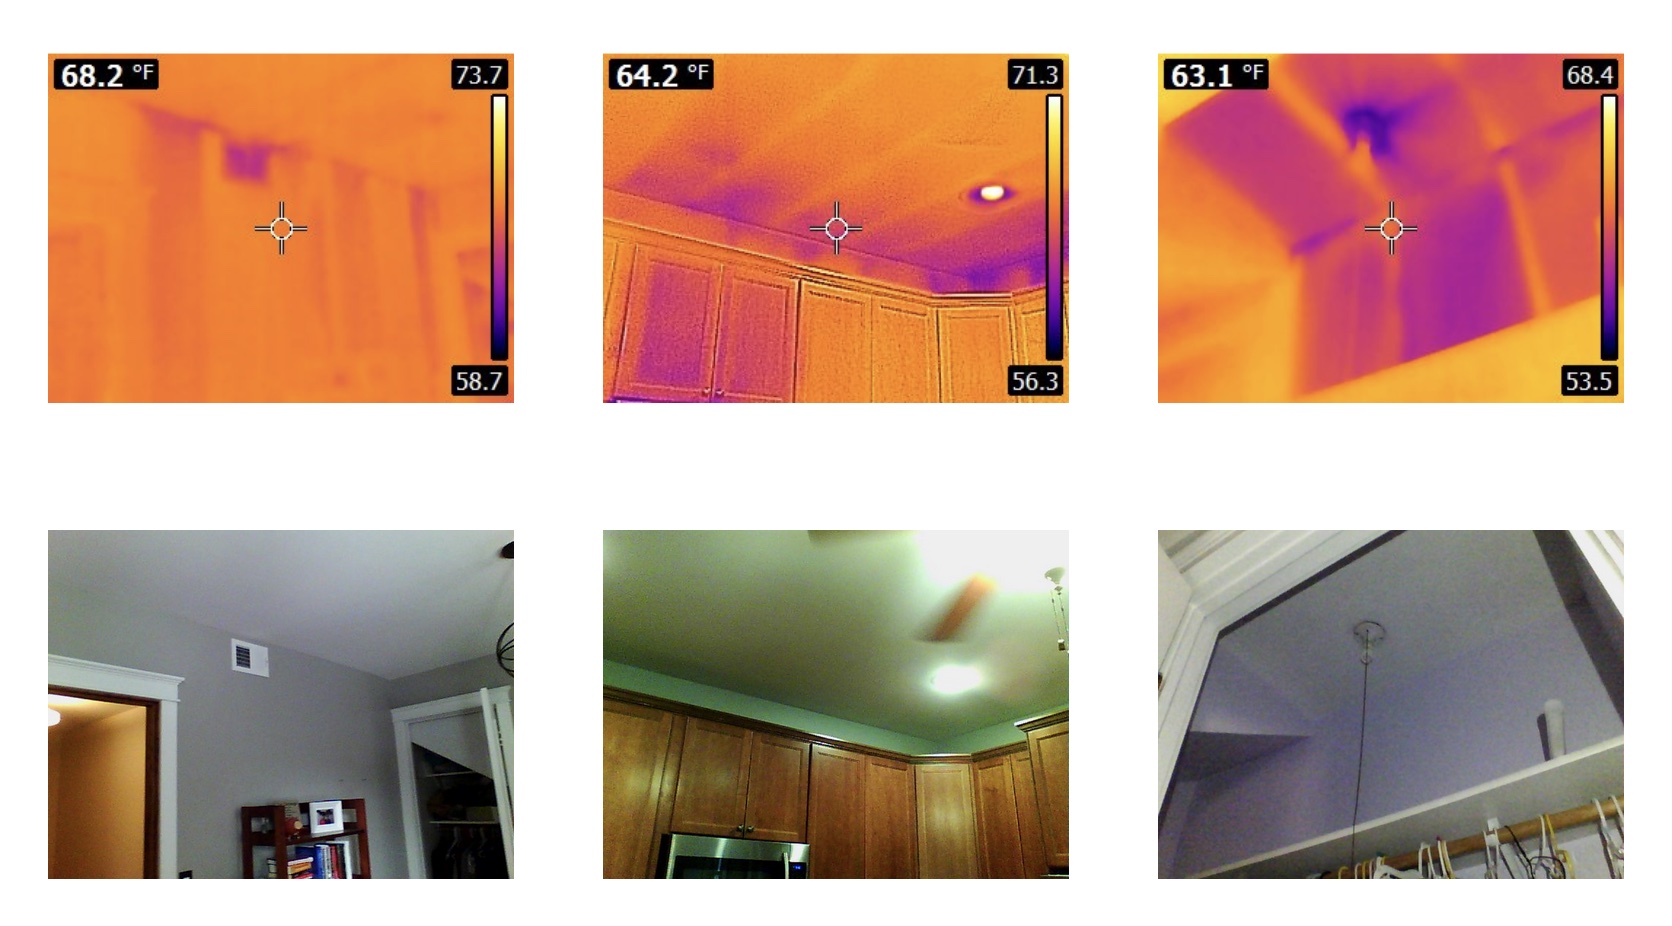 Pictures of places in our home with air leakage